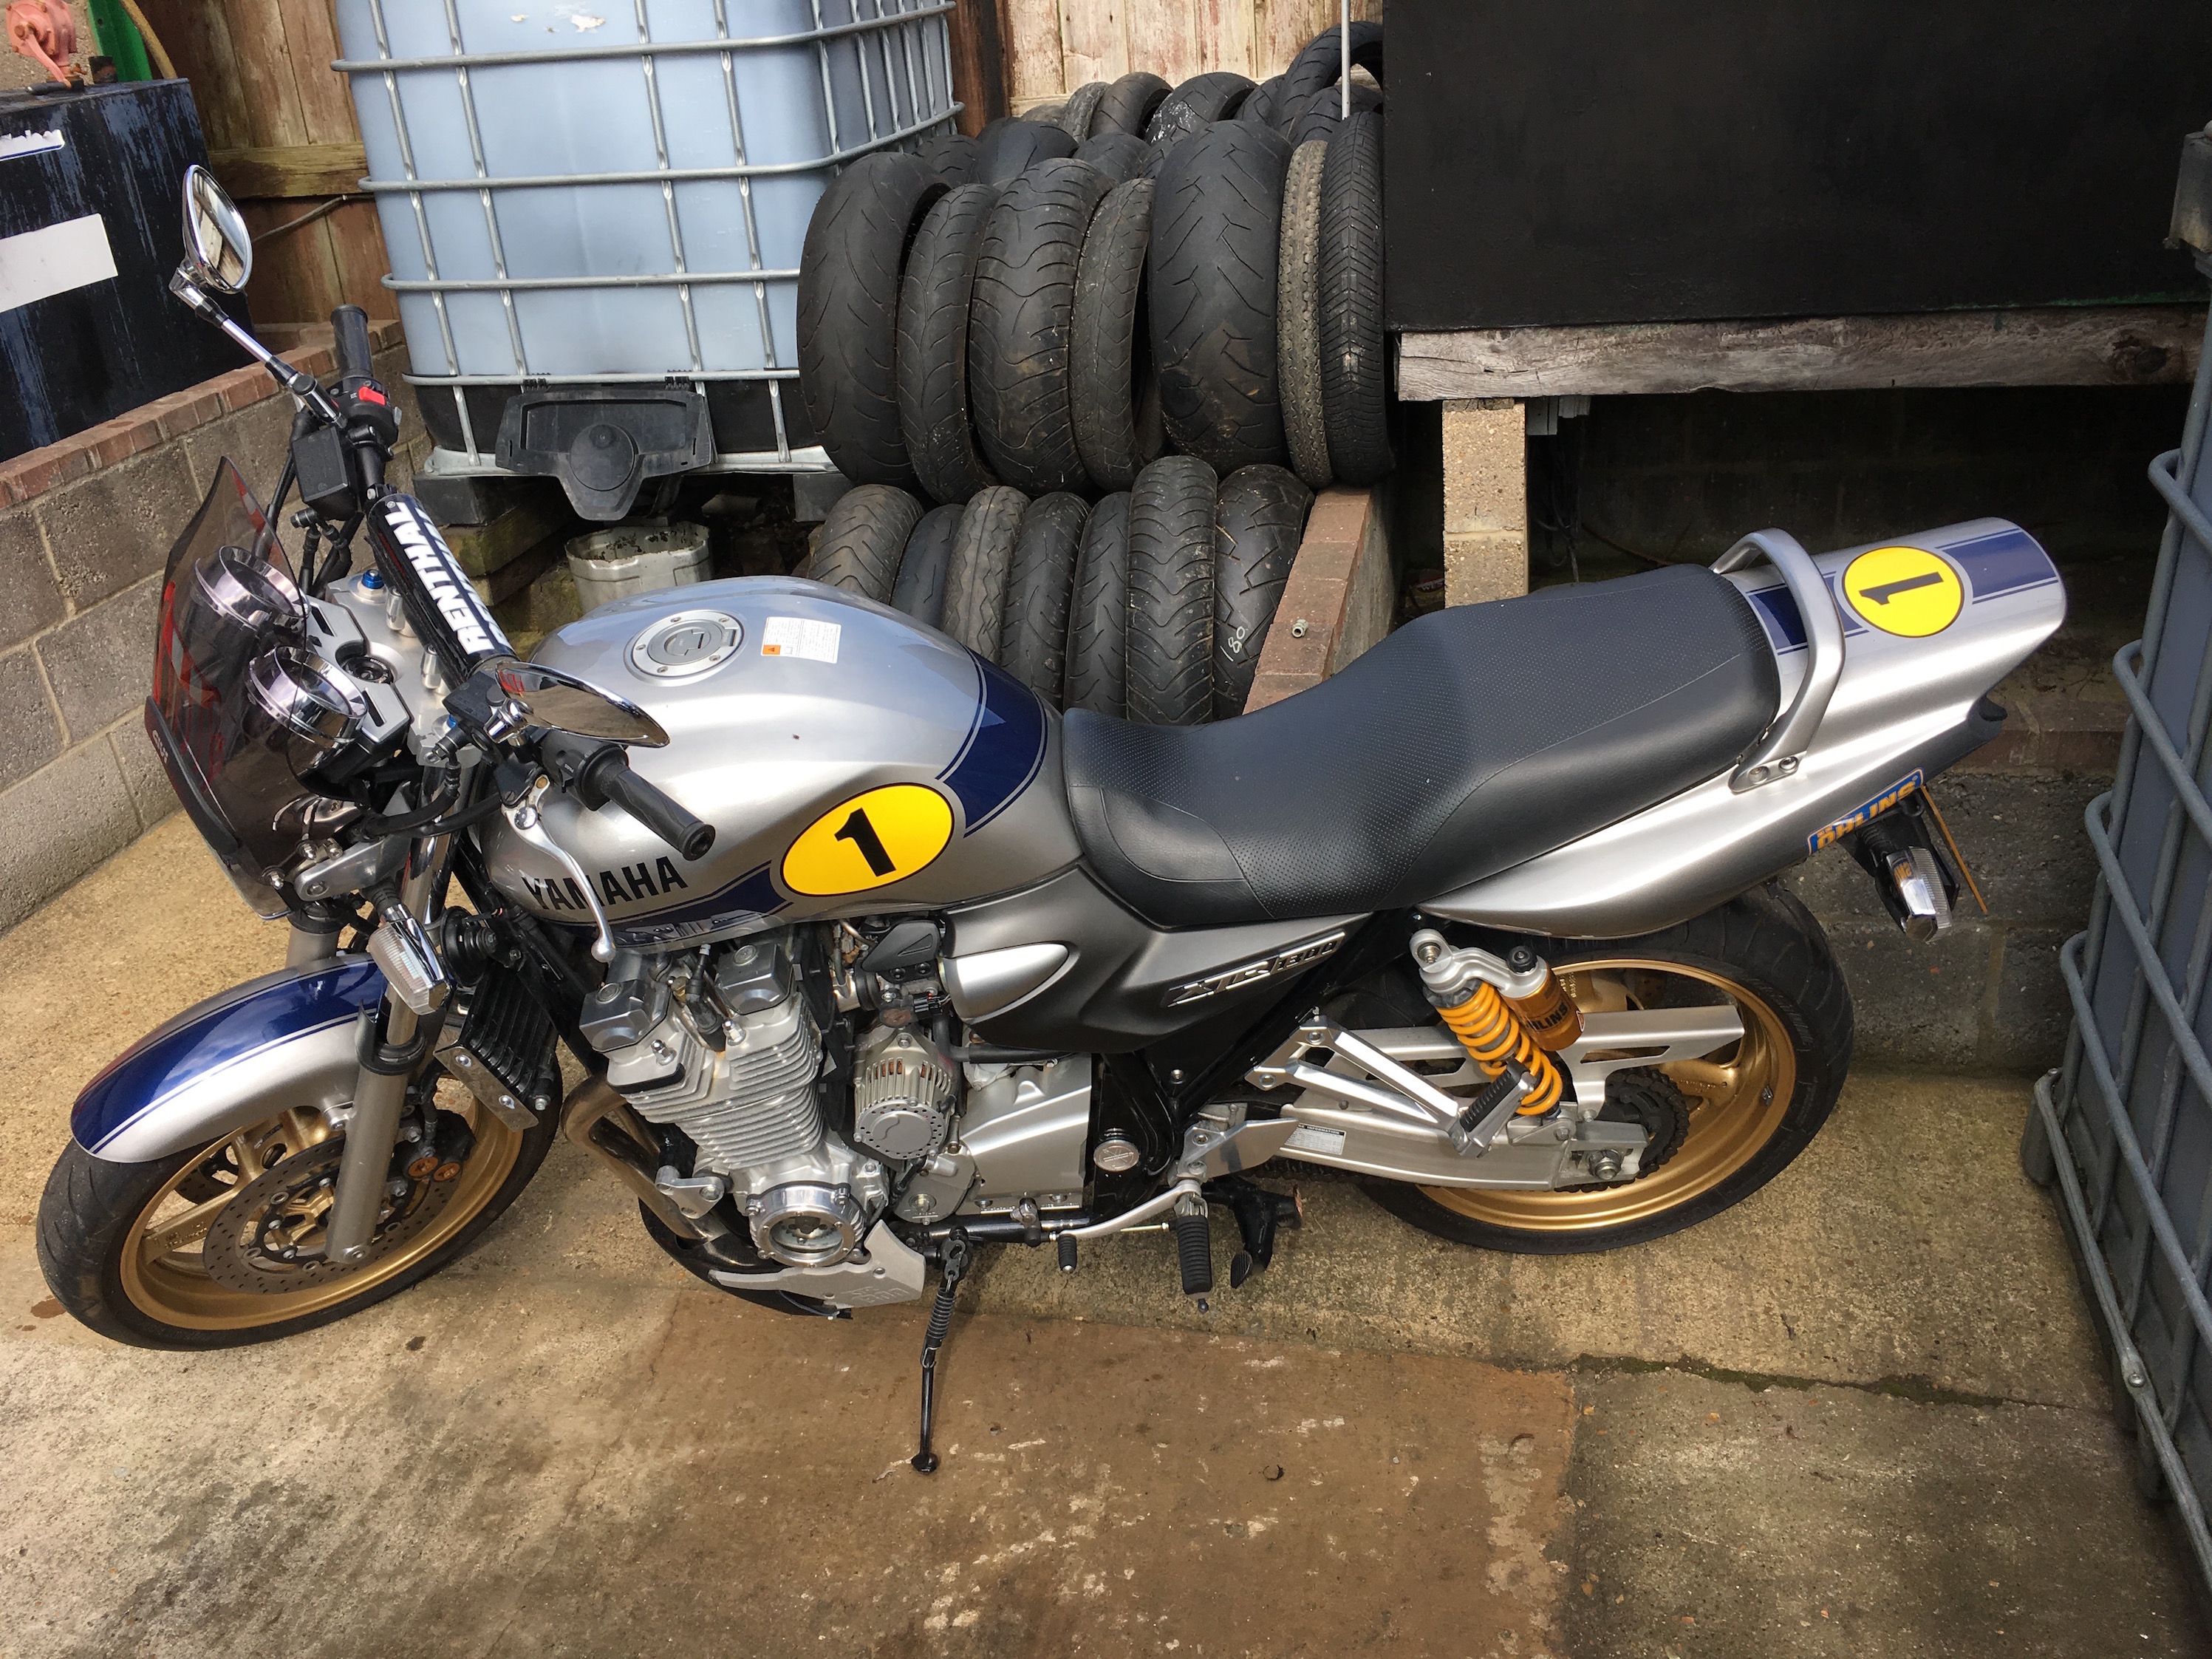 Yamaha XJR1300 – the customer sourced it, we fettled it then posted it to Dubai!